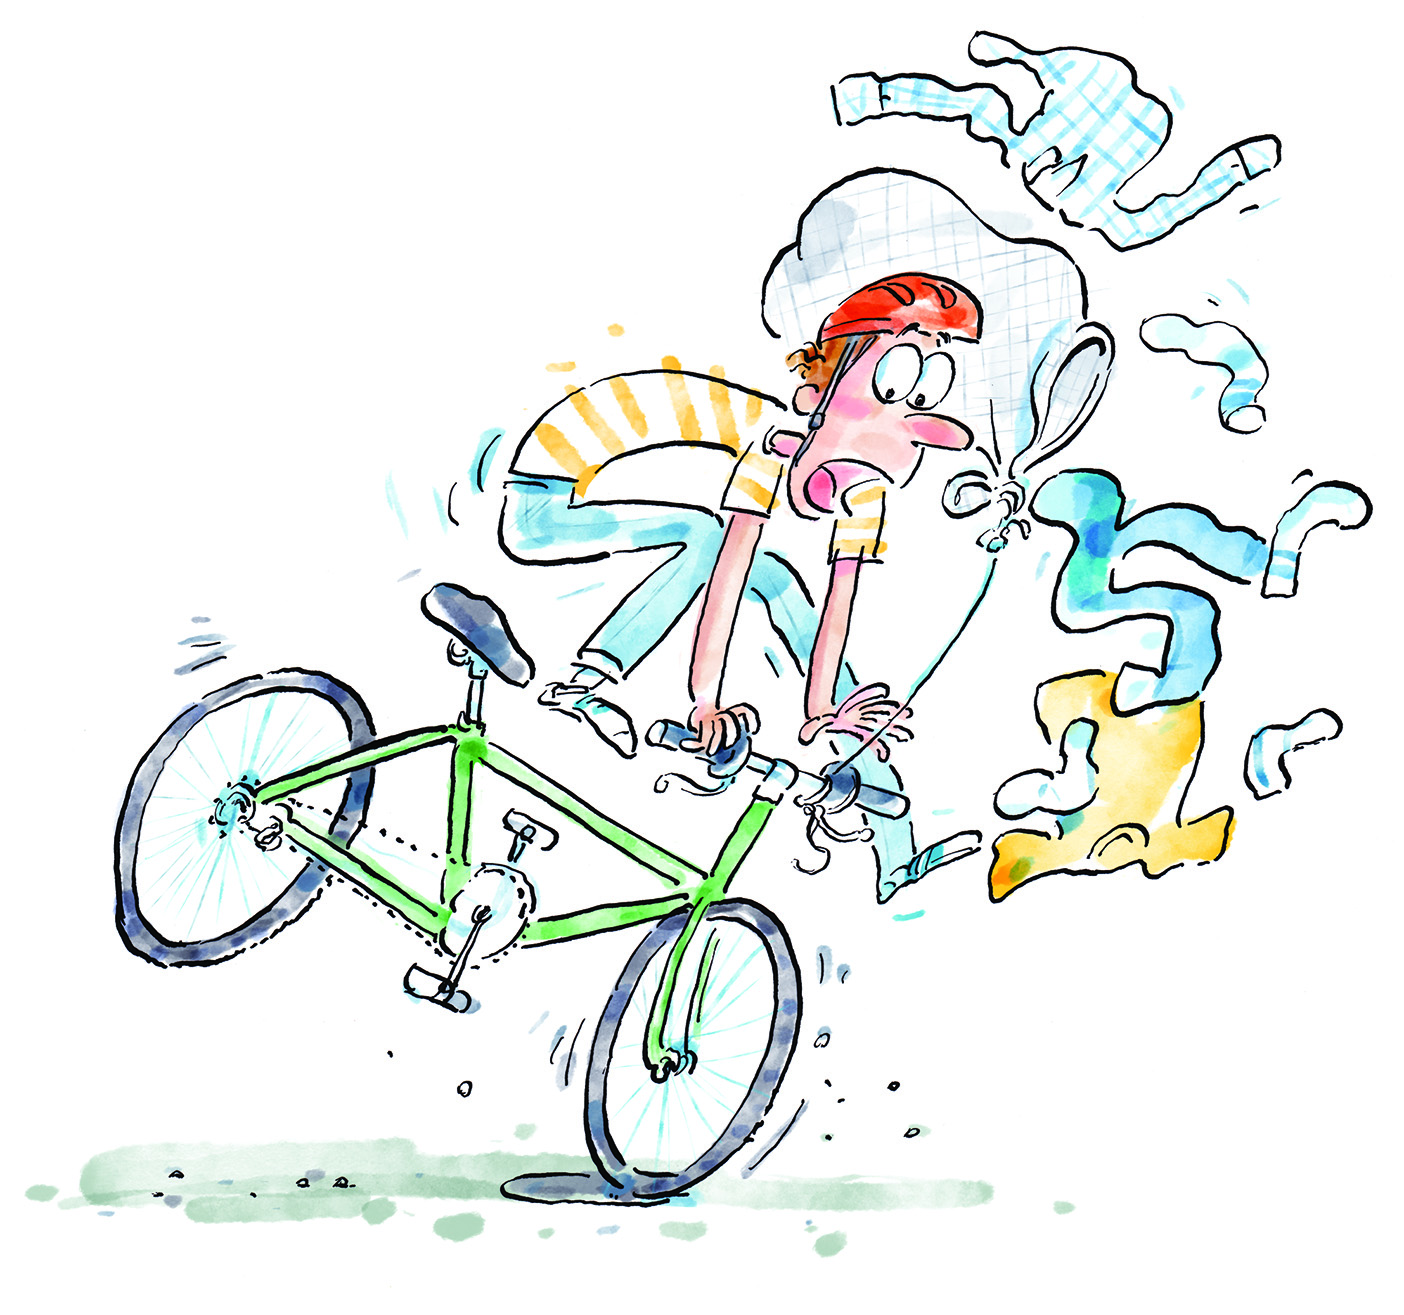 Drawing of a boy riding a bike and laundry falling around him.